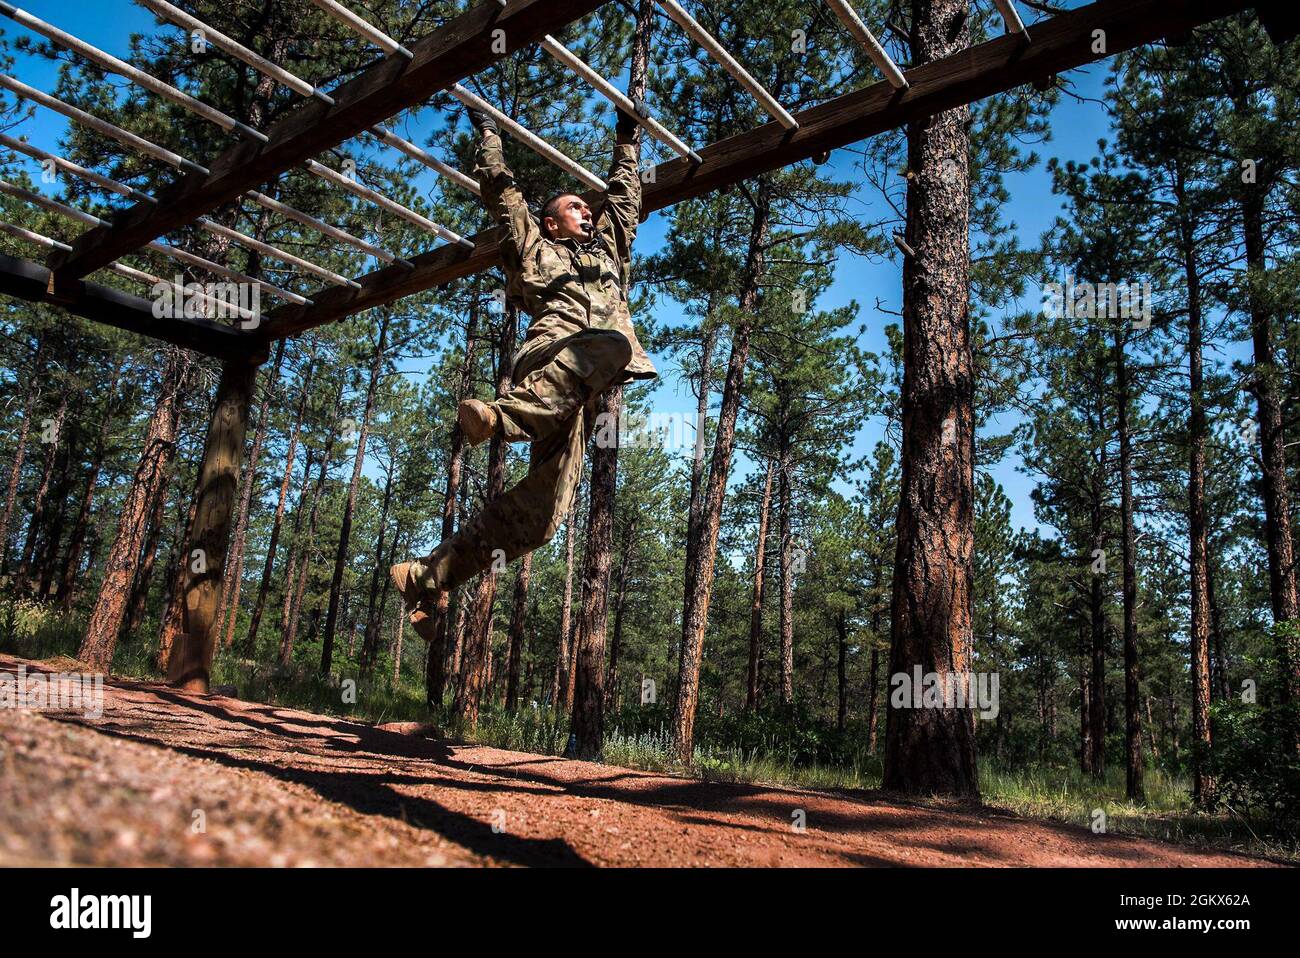 U.S. AIR FORCE ACADEMY, Colo. – A basic cadet from the Class of 2025 completes the obstacle course at the U.S. Air Force Academy's Jacks Valley in Colorado Springs, Colo., on July 15, 2021. Basic Cadet Training (BCT) is a six-week indoctrination program to guide the transformation of new cadets from being civilians to military academy cadets prepared to enter a four-year officer commissioning program. Stock Photo